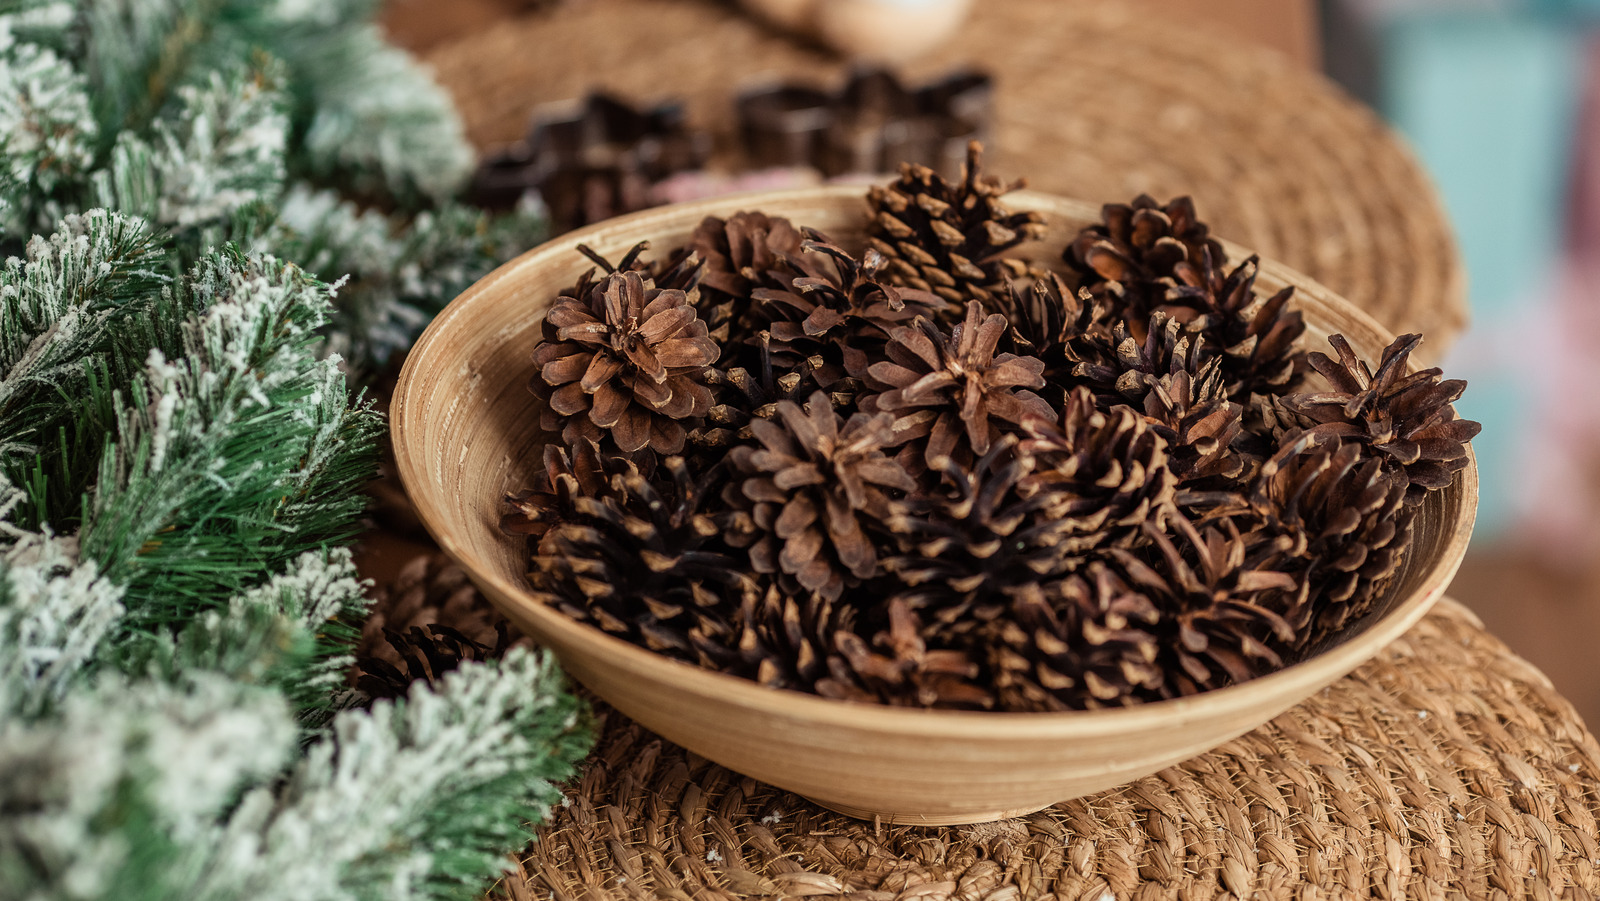 The Easy Hack To Refreshing Last Season's Scented Pinecones